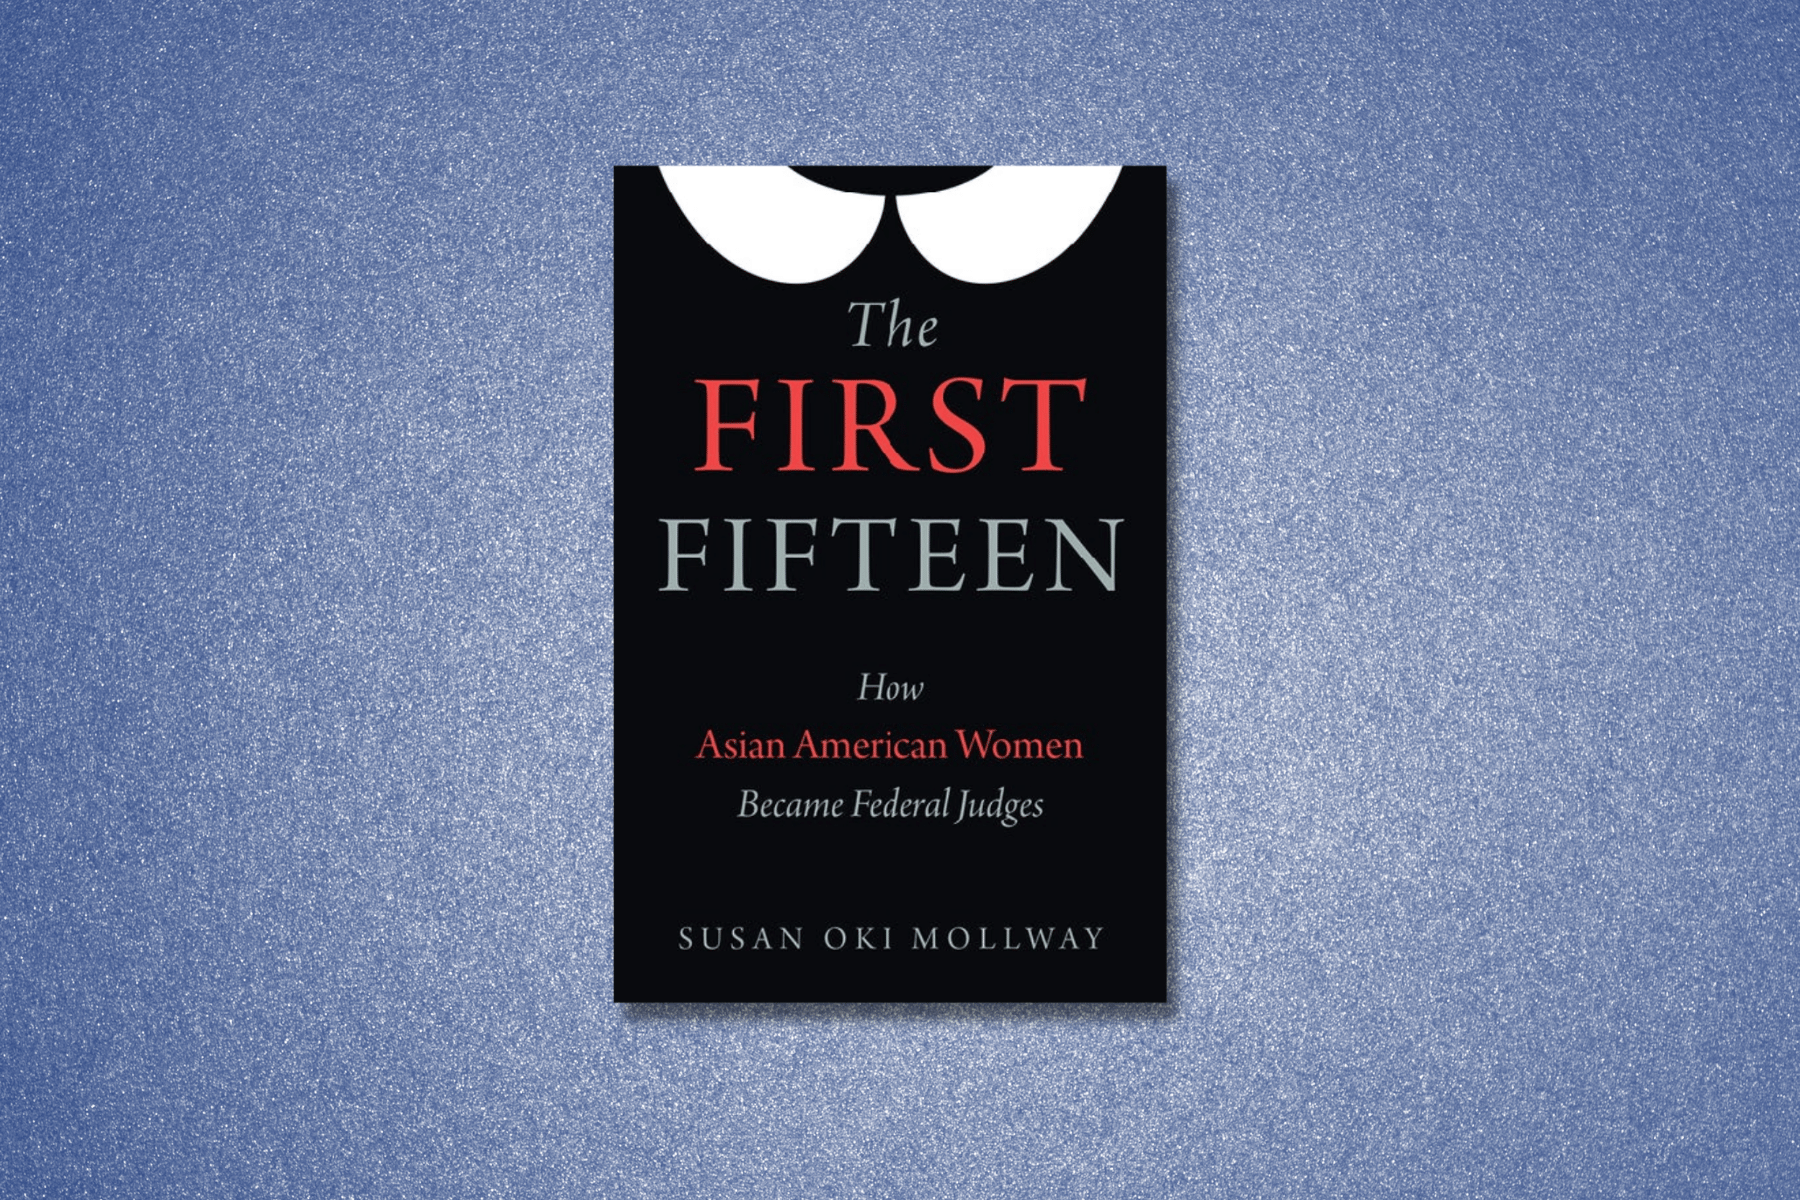 Cover of "The First Fifteen" on blue background